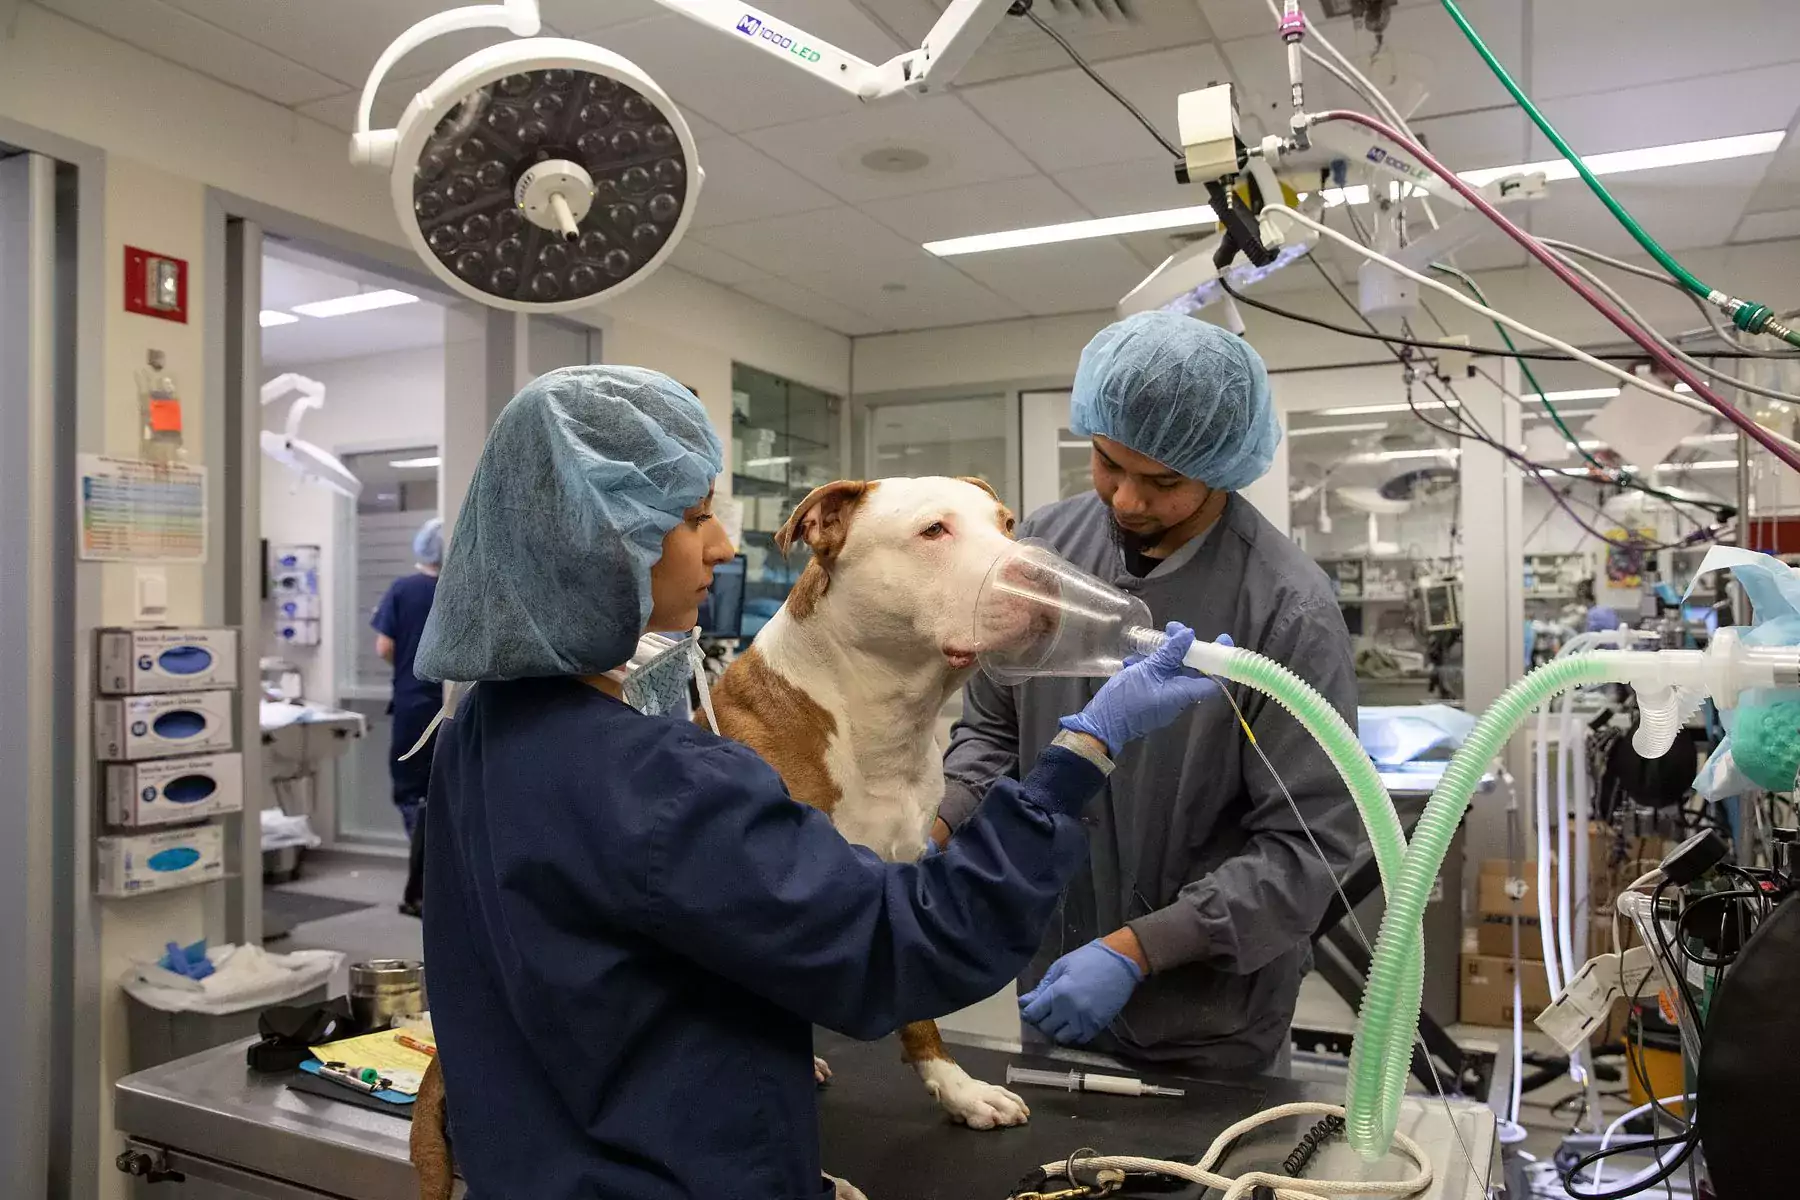 People in scrubs preparing a large white and brown dog for surgery